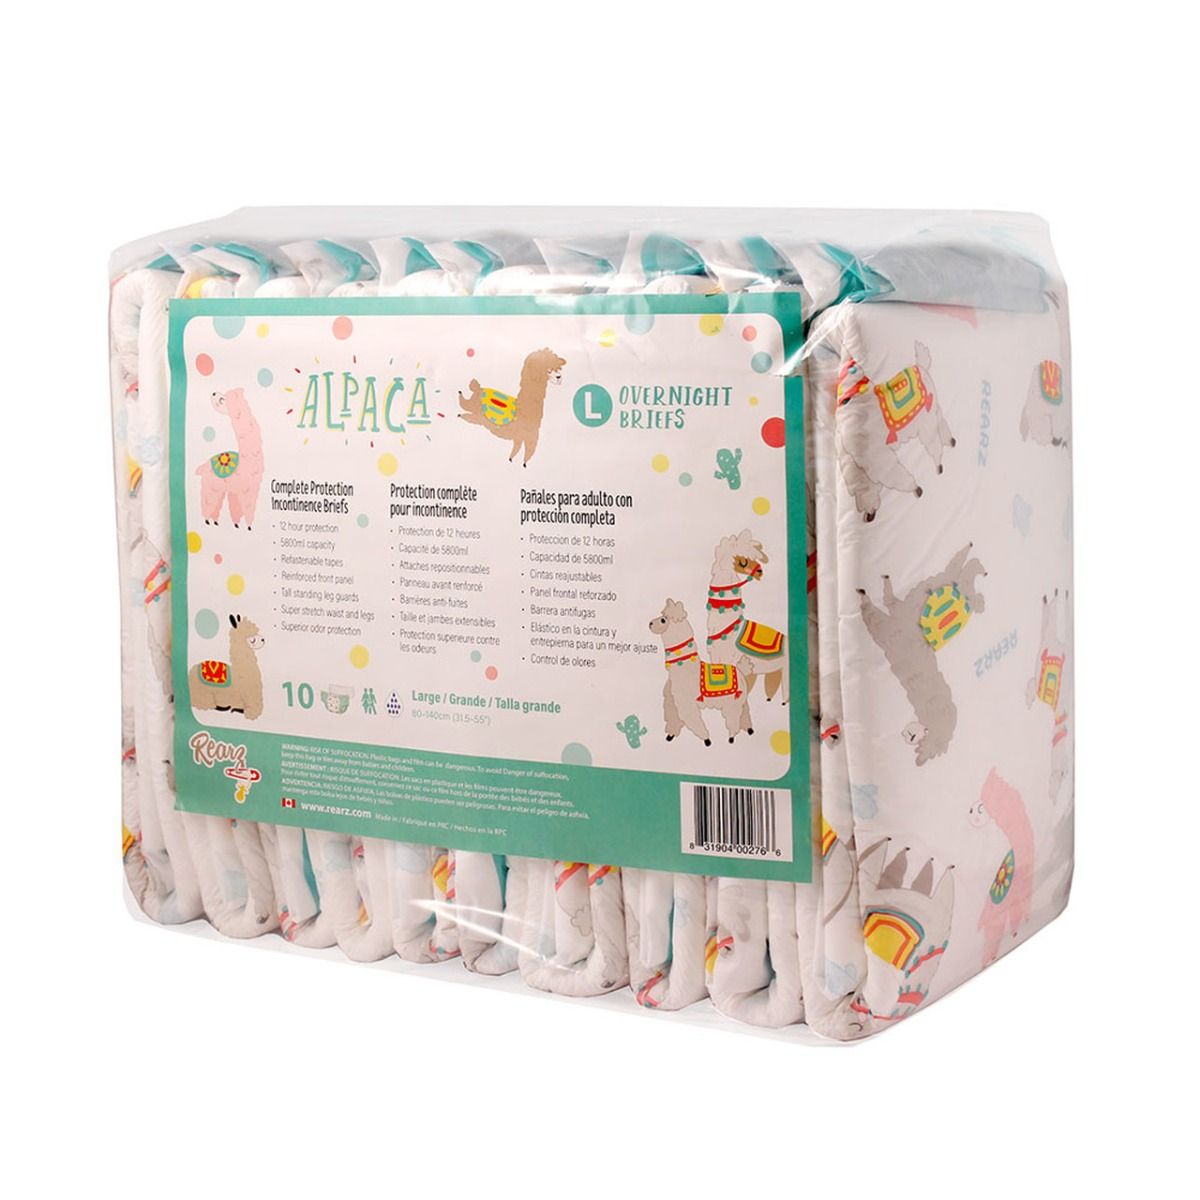 Pack of white adult diapers by rearz